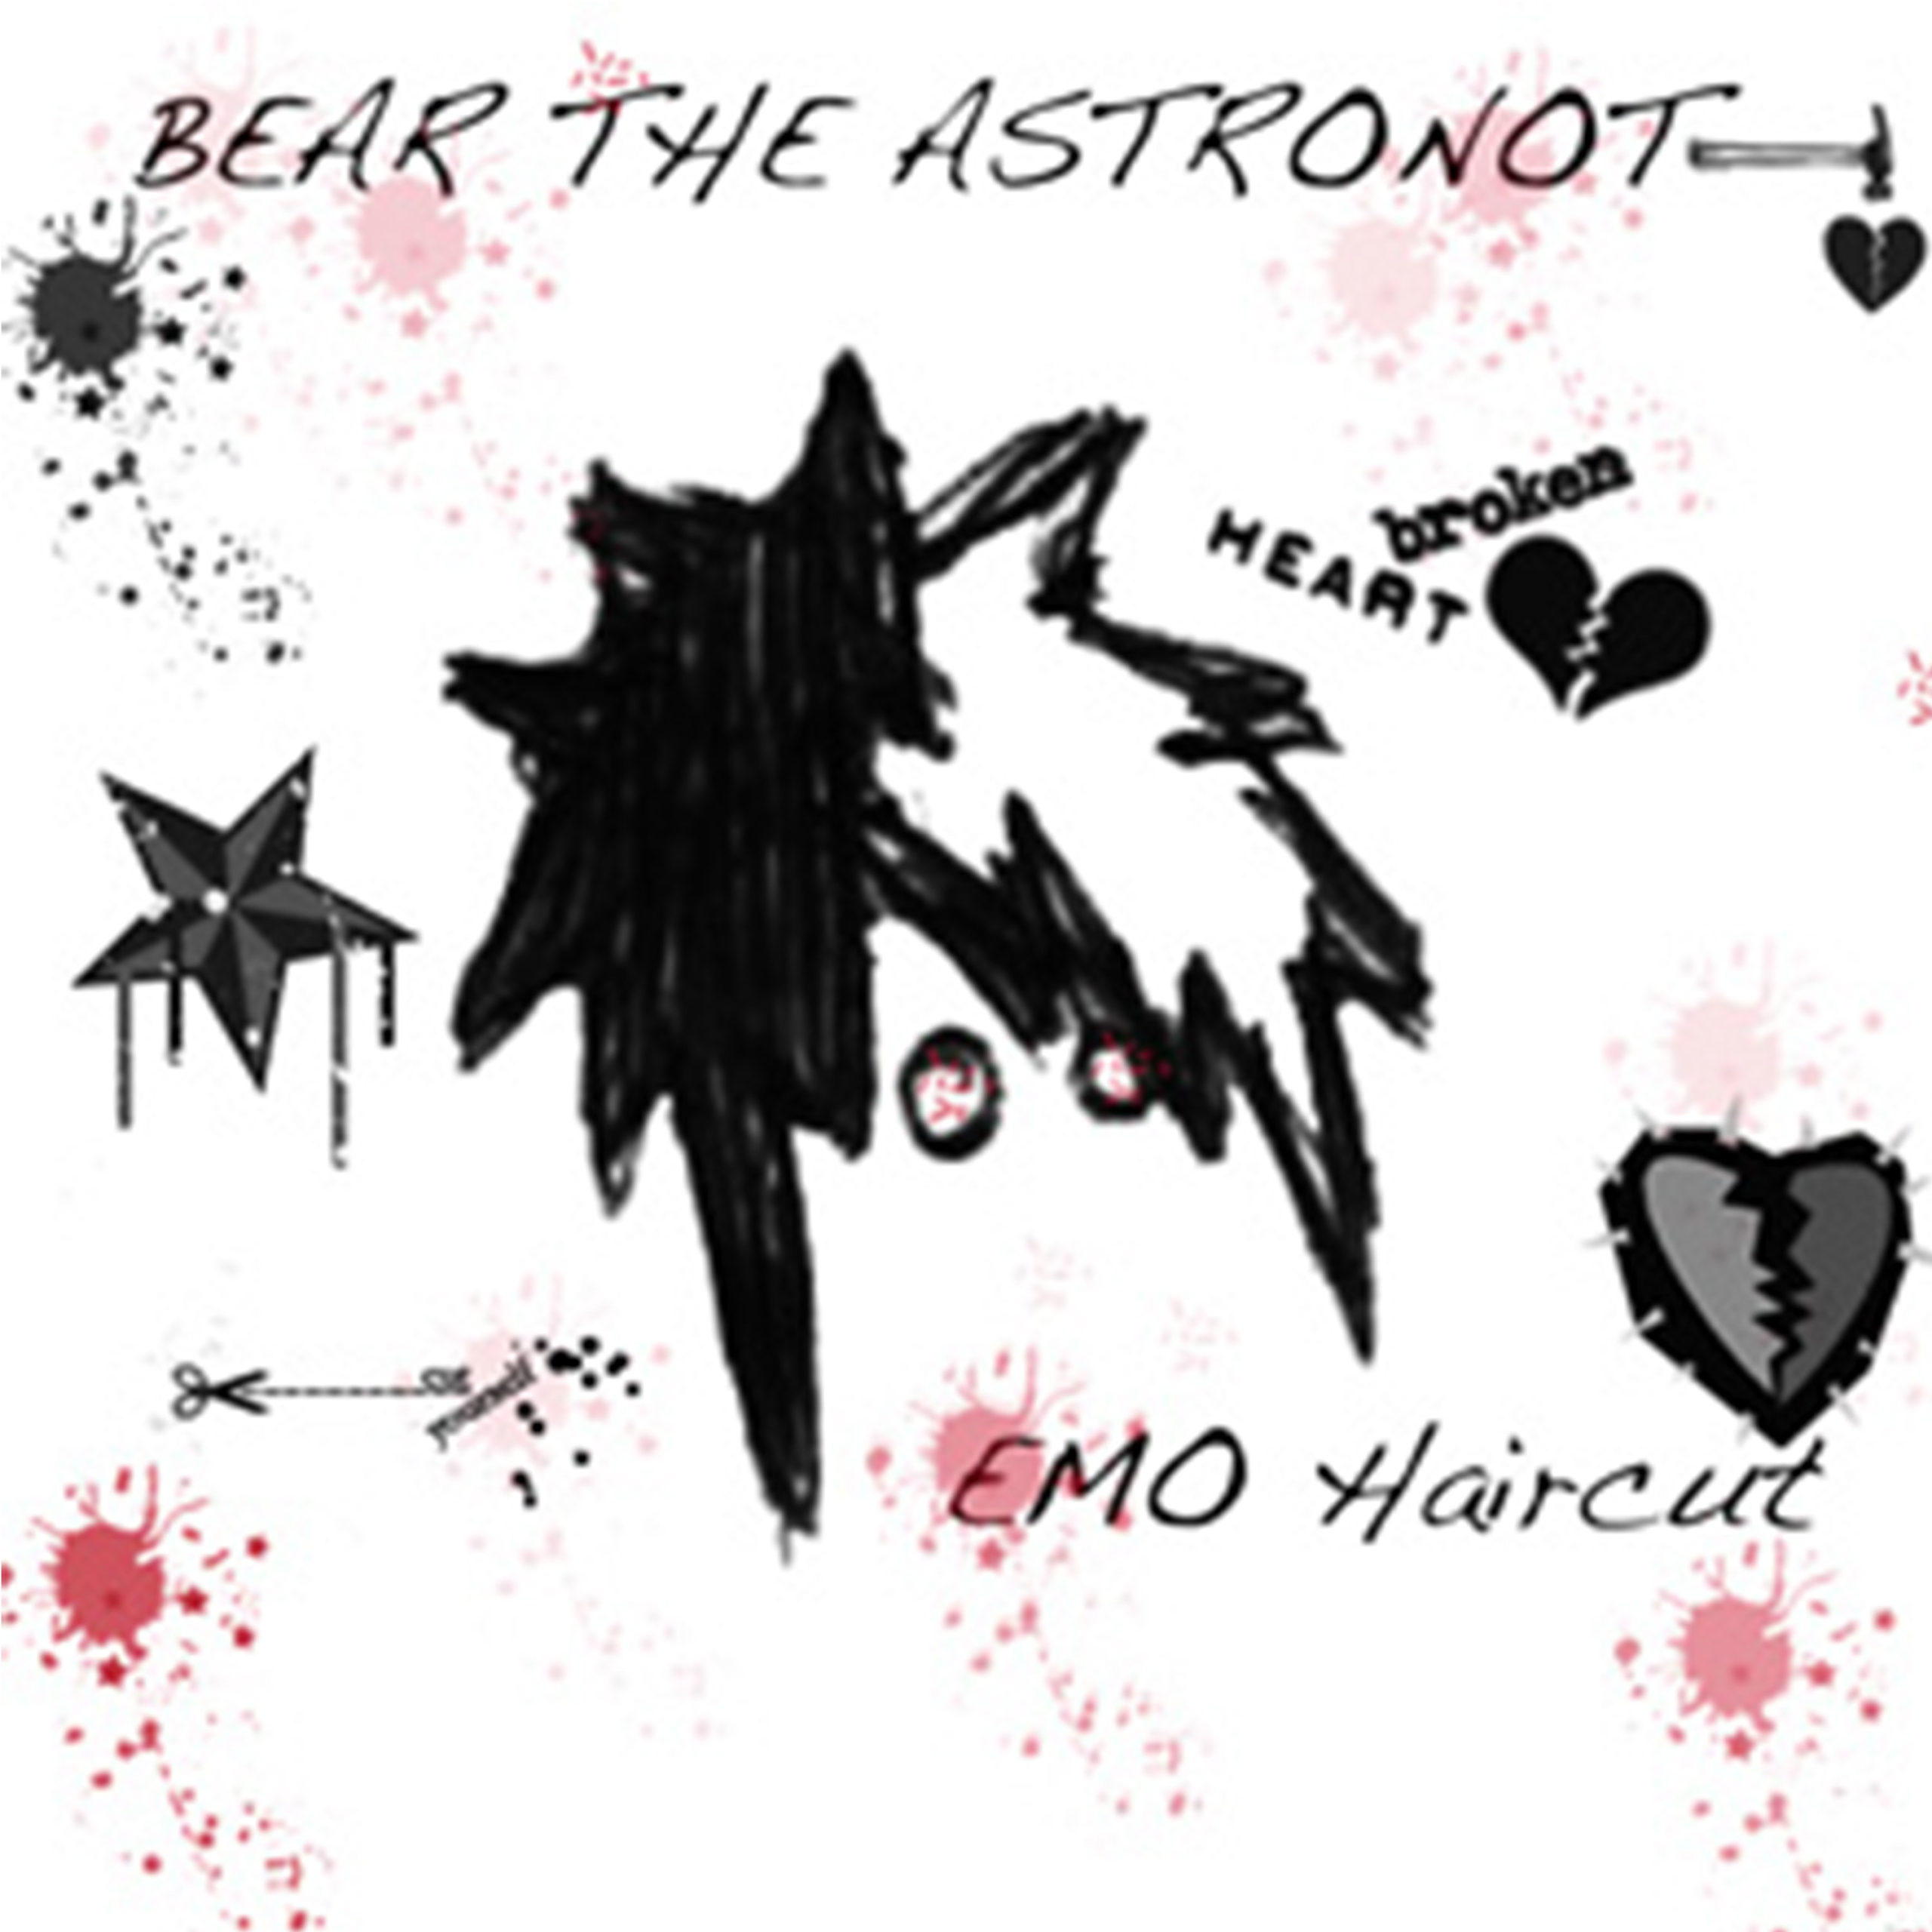 Emo-Haircut-Album-Cover-Bear-the-Astronot3000